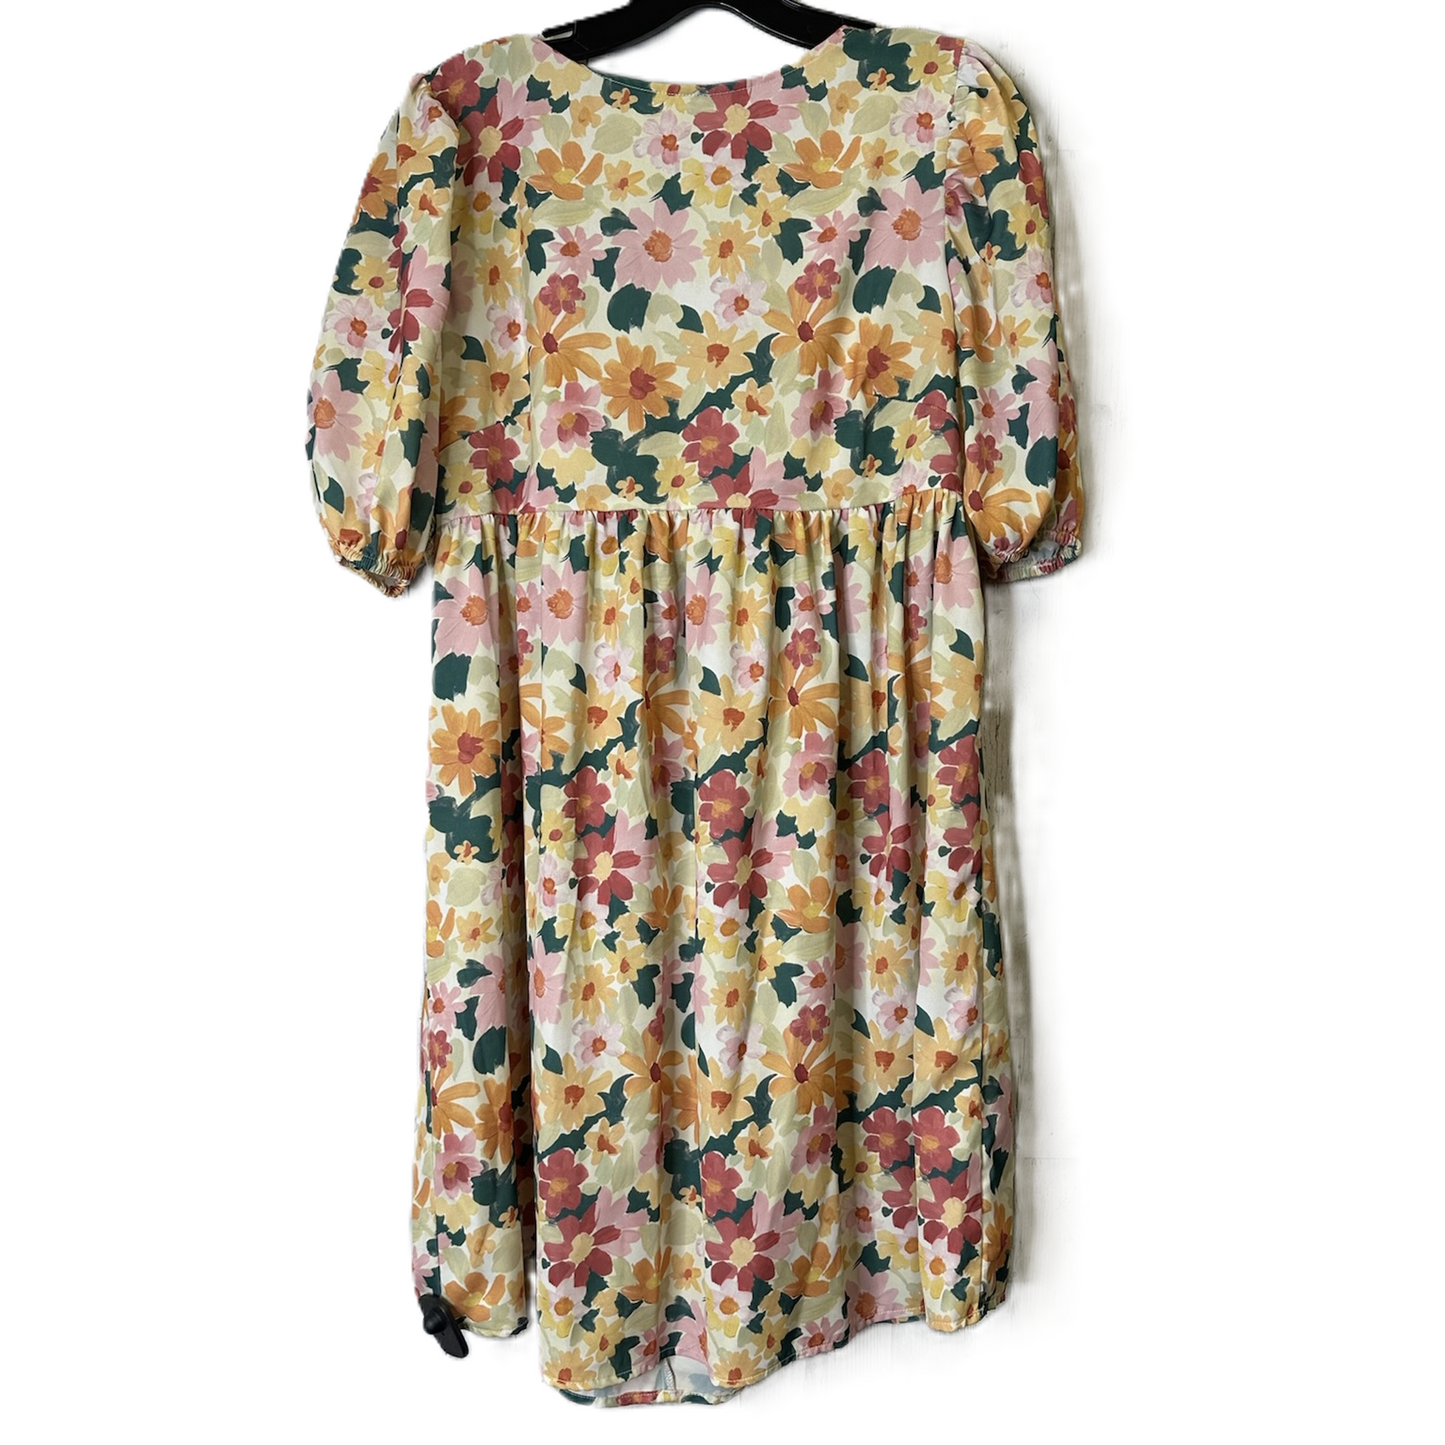 Floral Print Dress Casual Short By Shein, Size: M